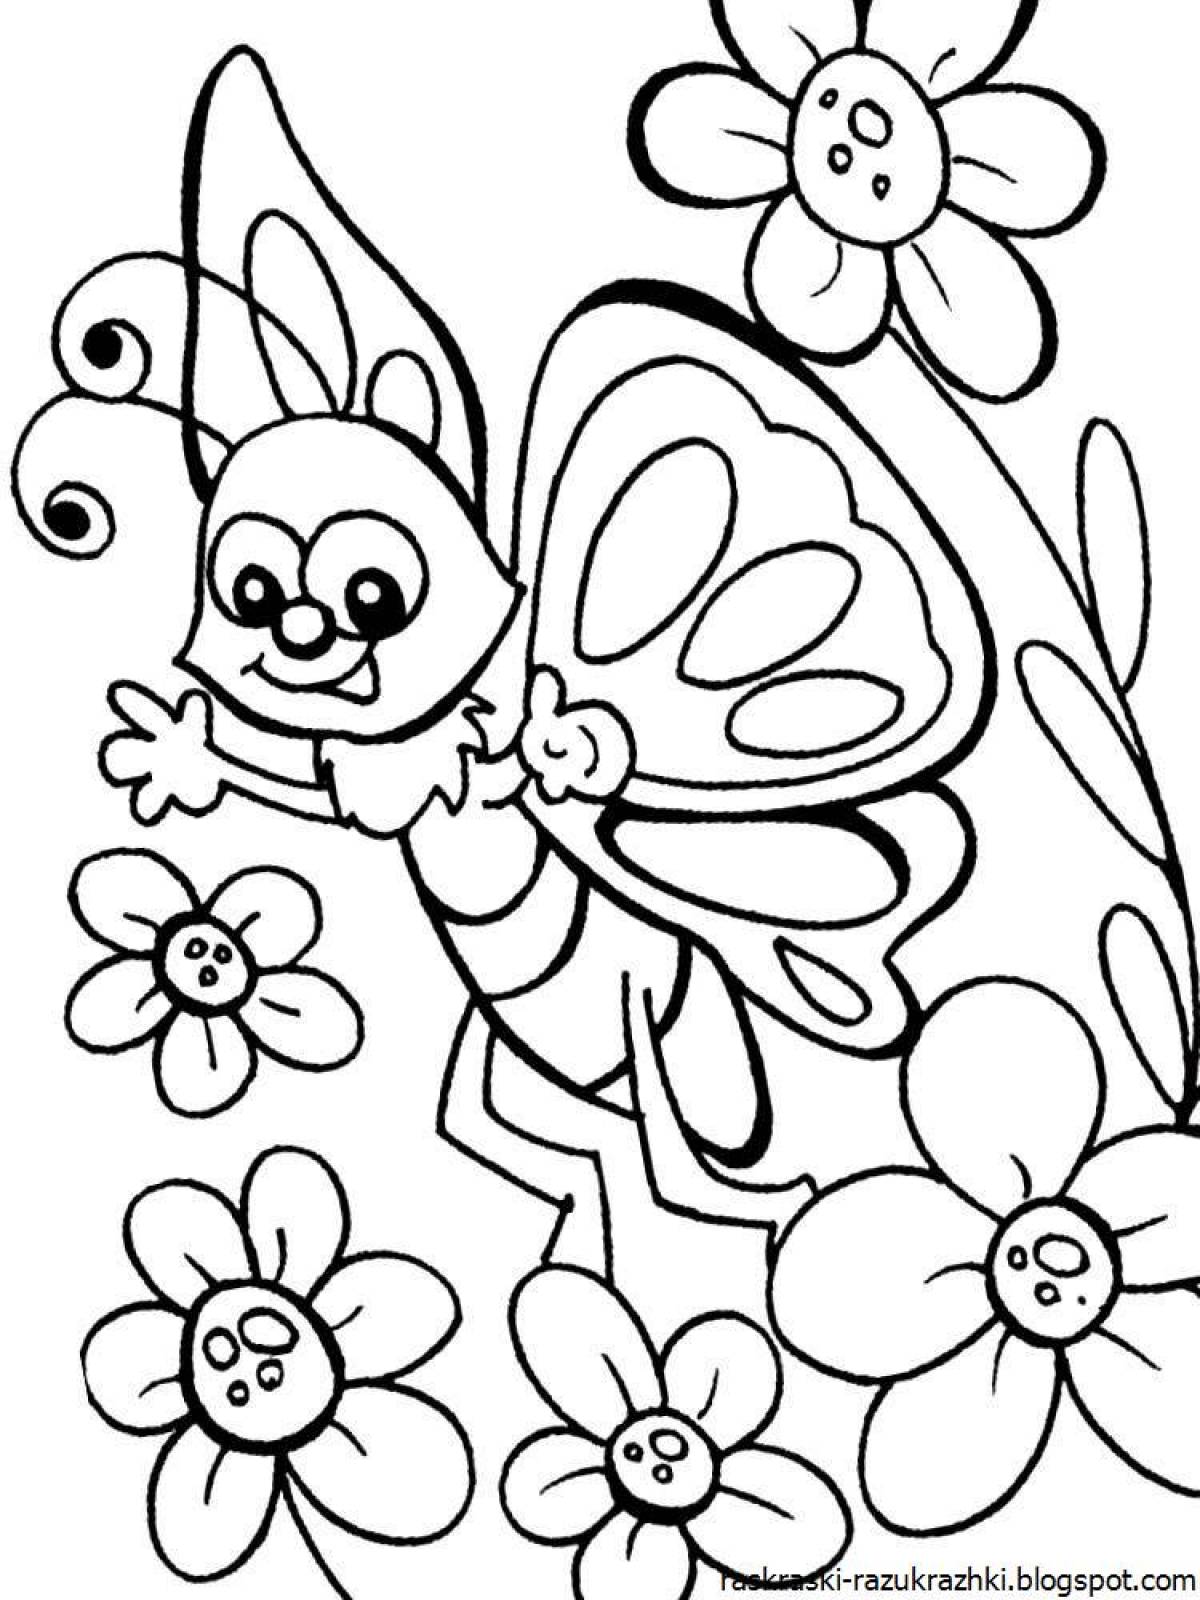 Bright butterfly coloring book for children 6-7 years old